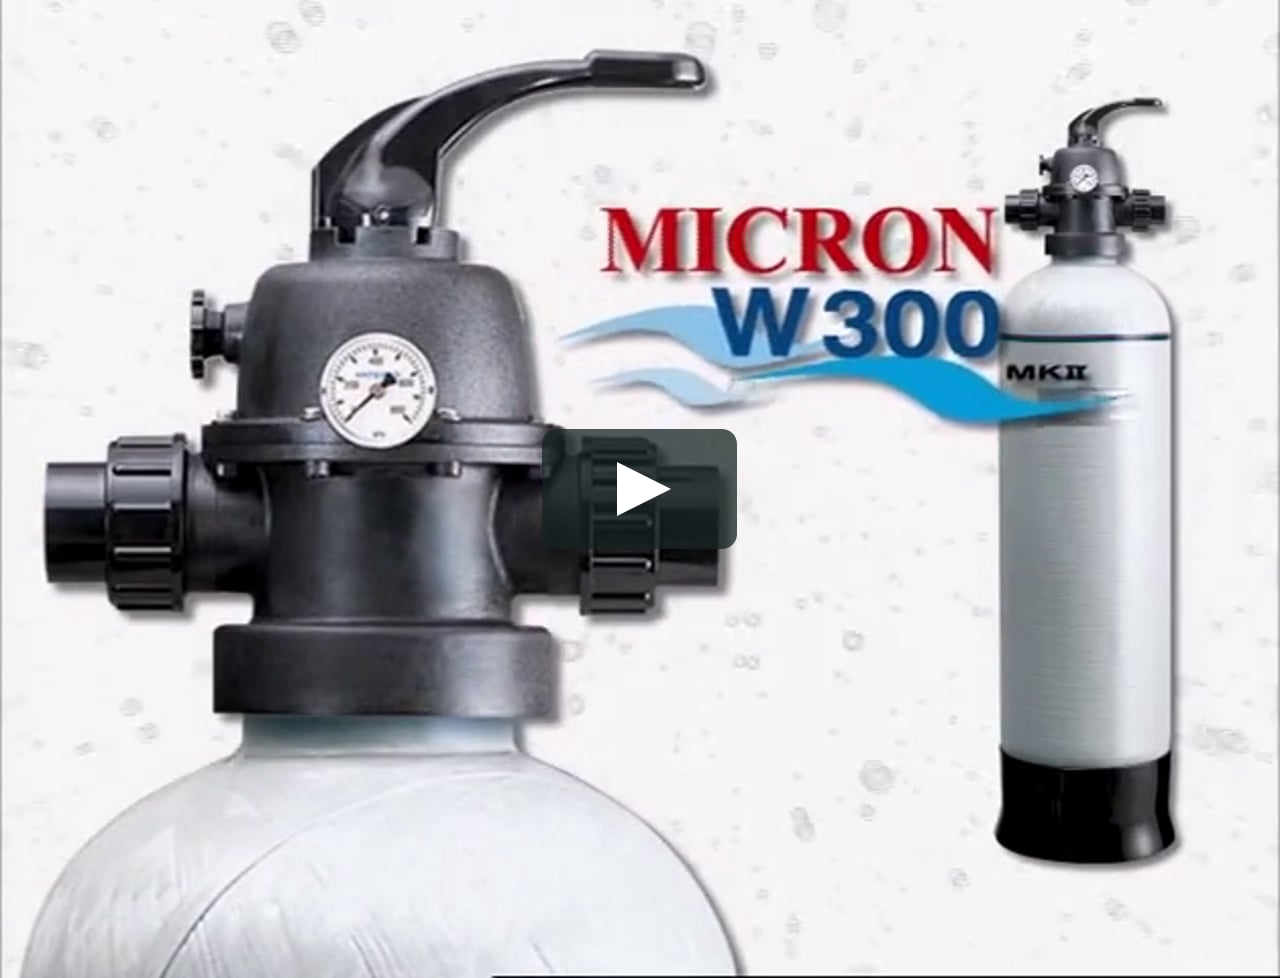 Micron W300 whole of house filter on Vimeo